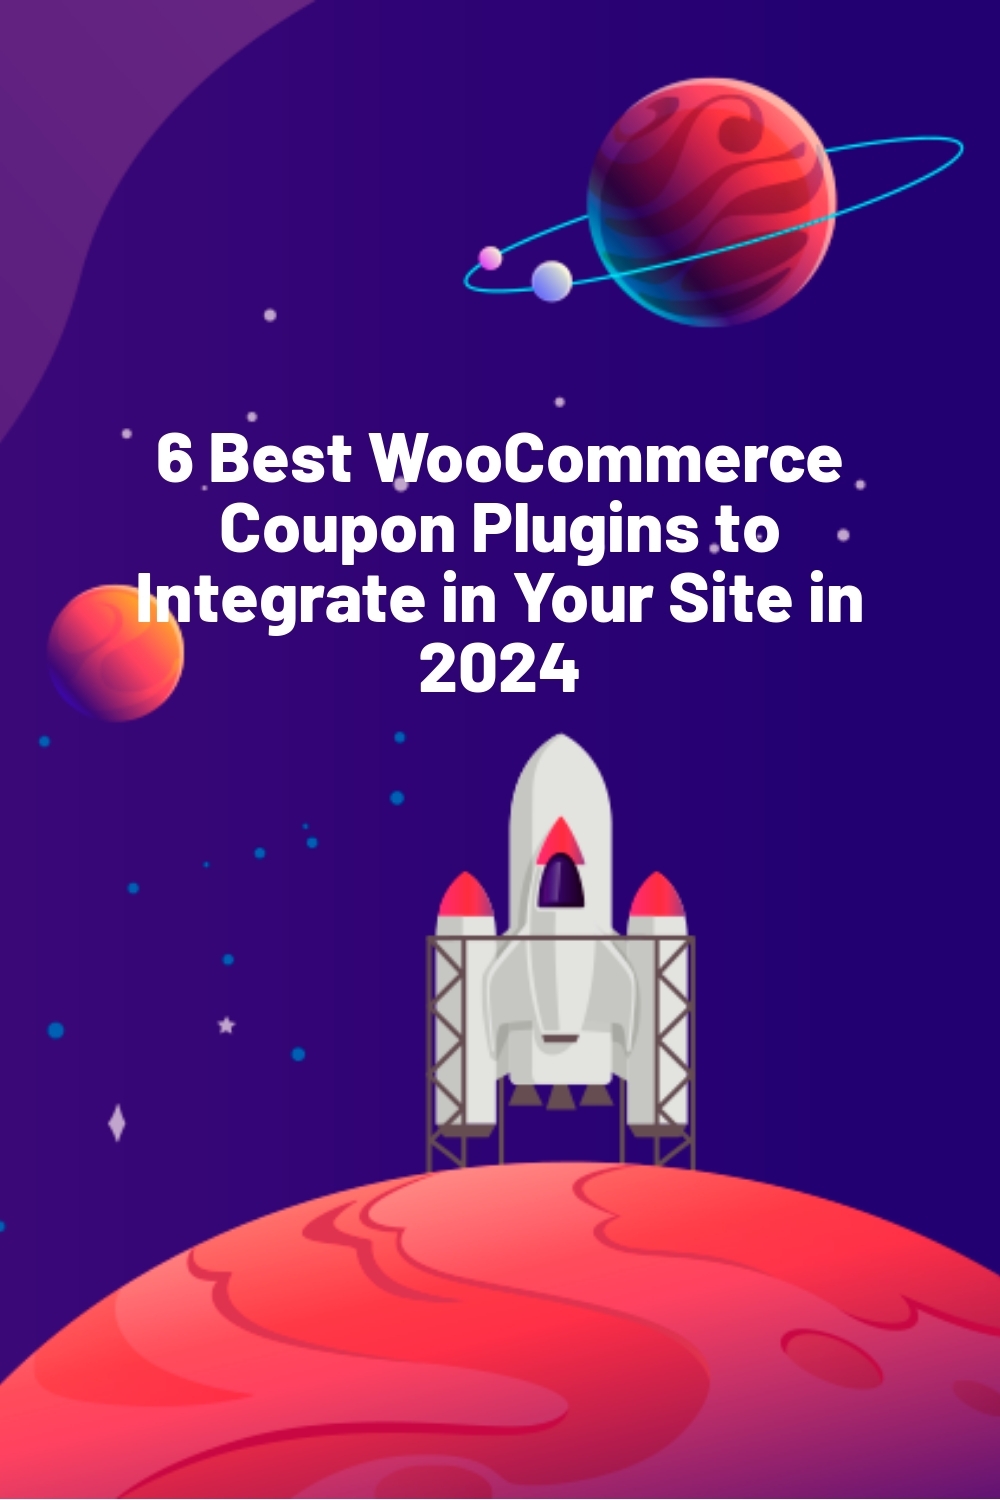 6 Best WooCommerce Coupon Plugins to Integrate in Your Site in 2024